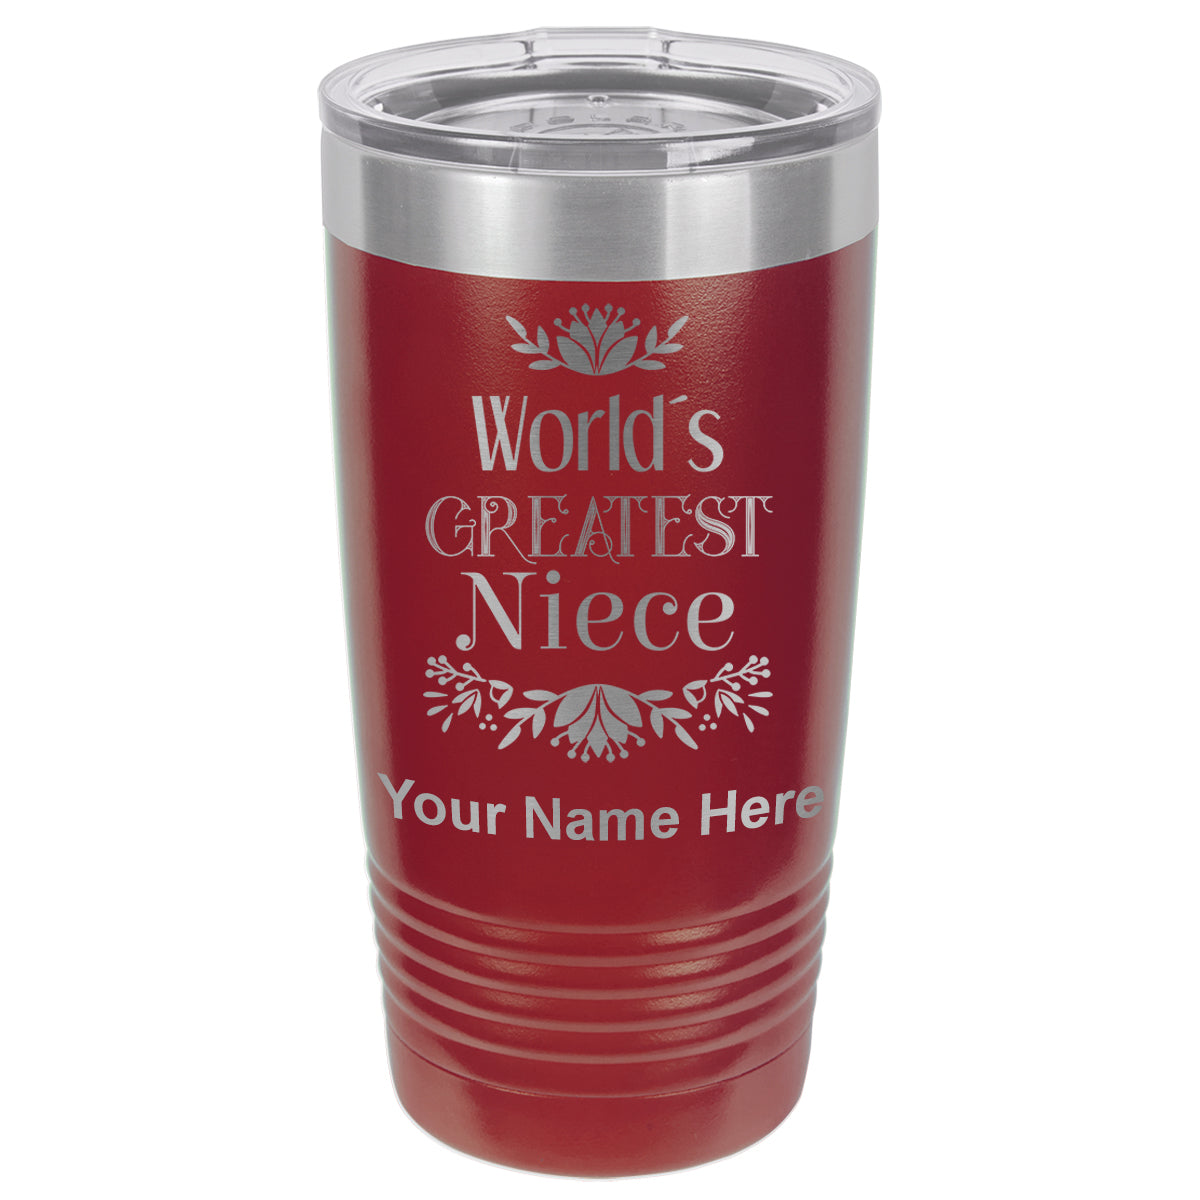 20oz Vacuum Insulated Tumbler Mug, World's Greatest Niece, Personalized Engraving Included